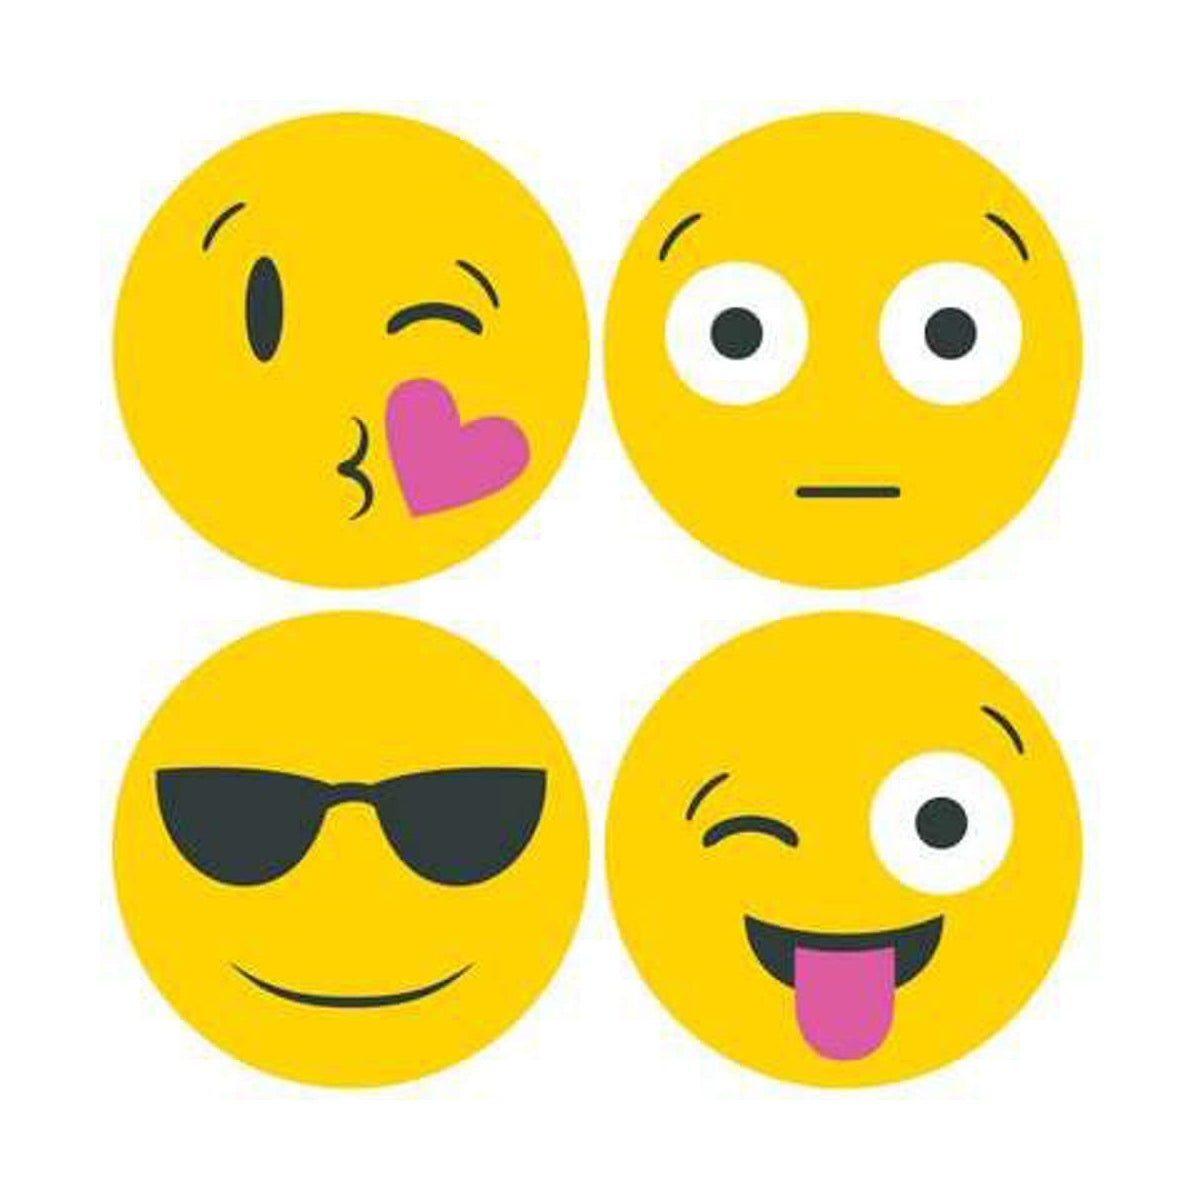 3M Post-it Notes BC-2030, Assorted Emoji, 73.6x73.6 mm, Yellow